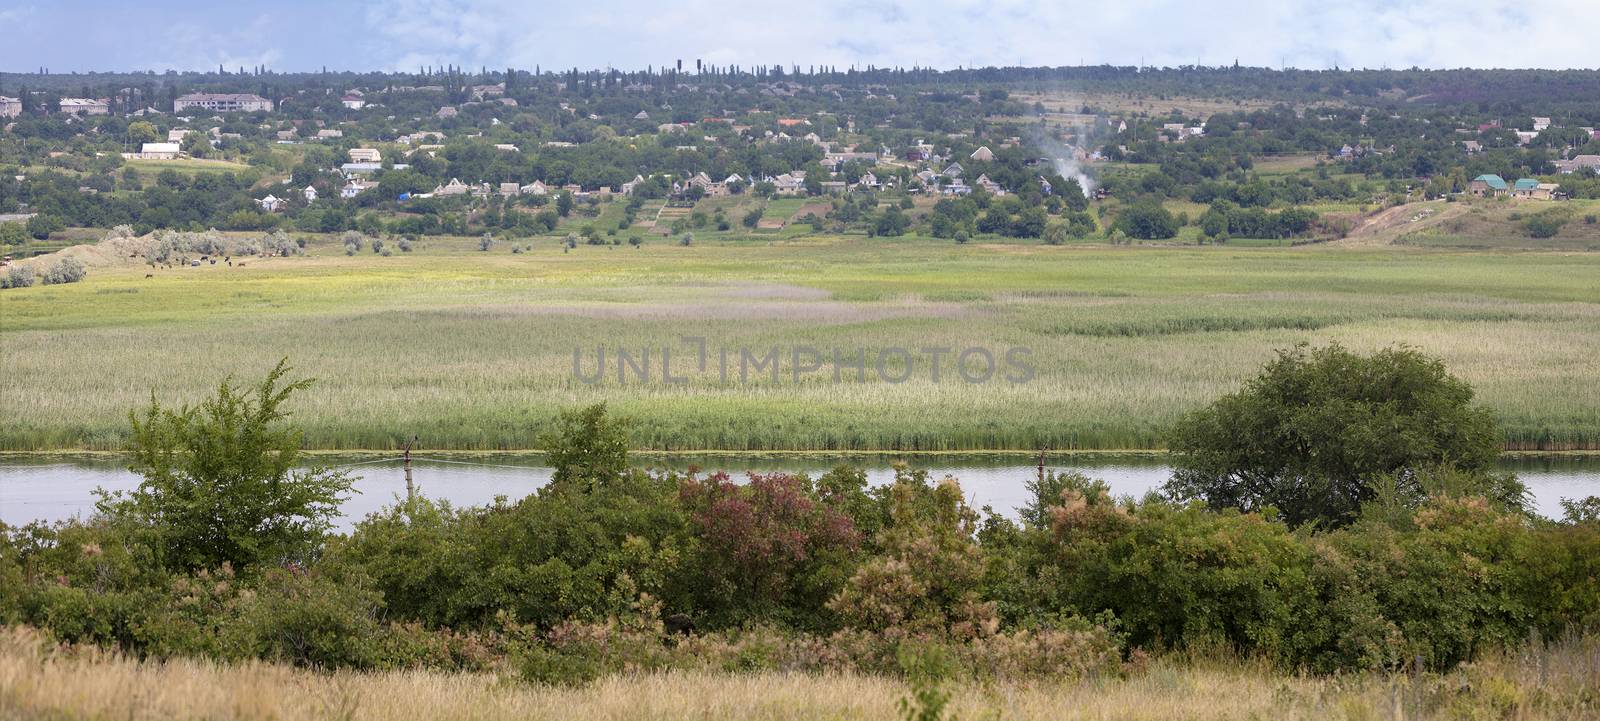 Rural landscape overlooking the river with water meadows and rural houses by Sergii